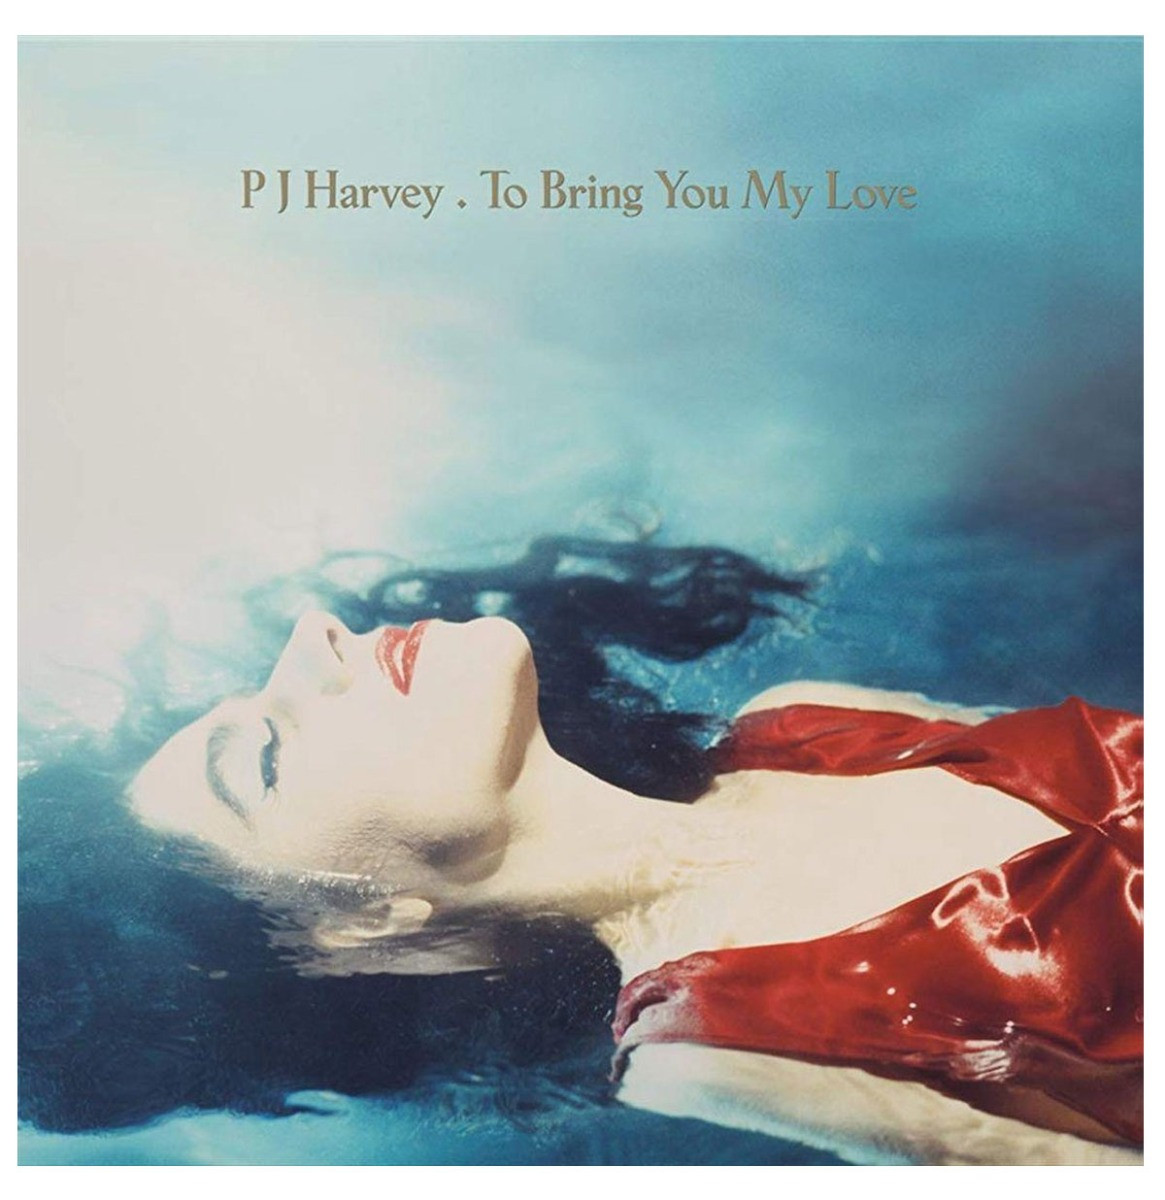 P.J. Harvey - To Bring You My Love LP